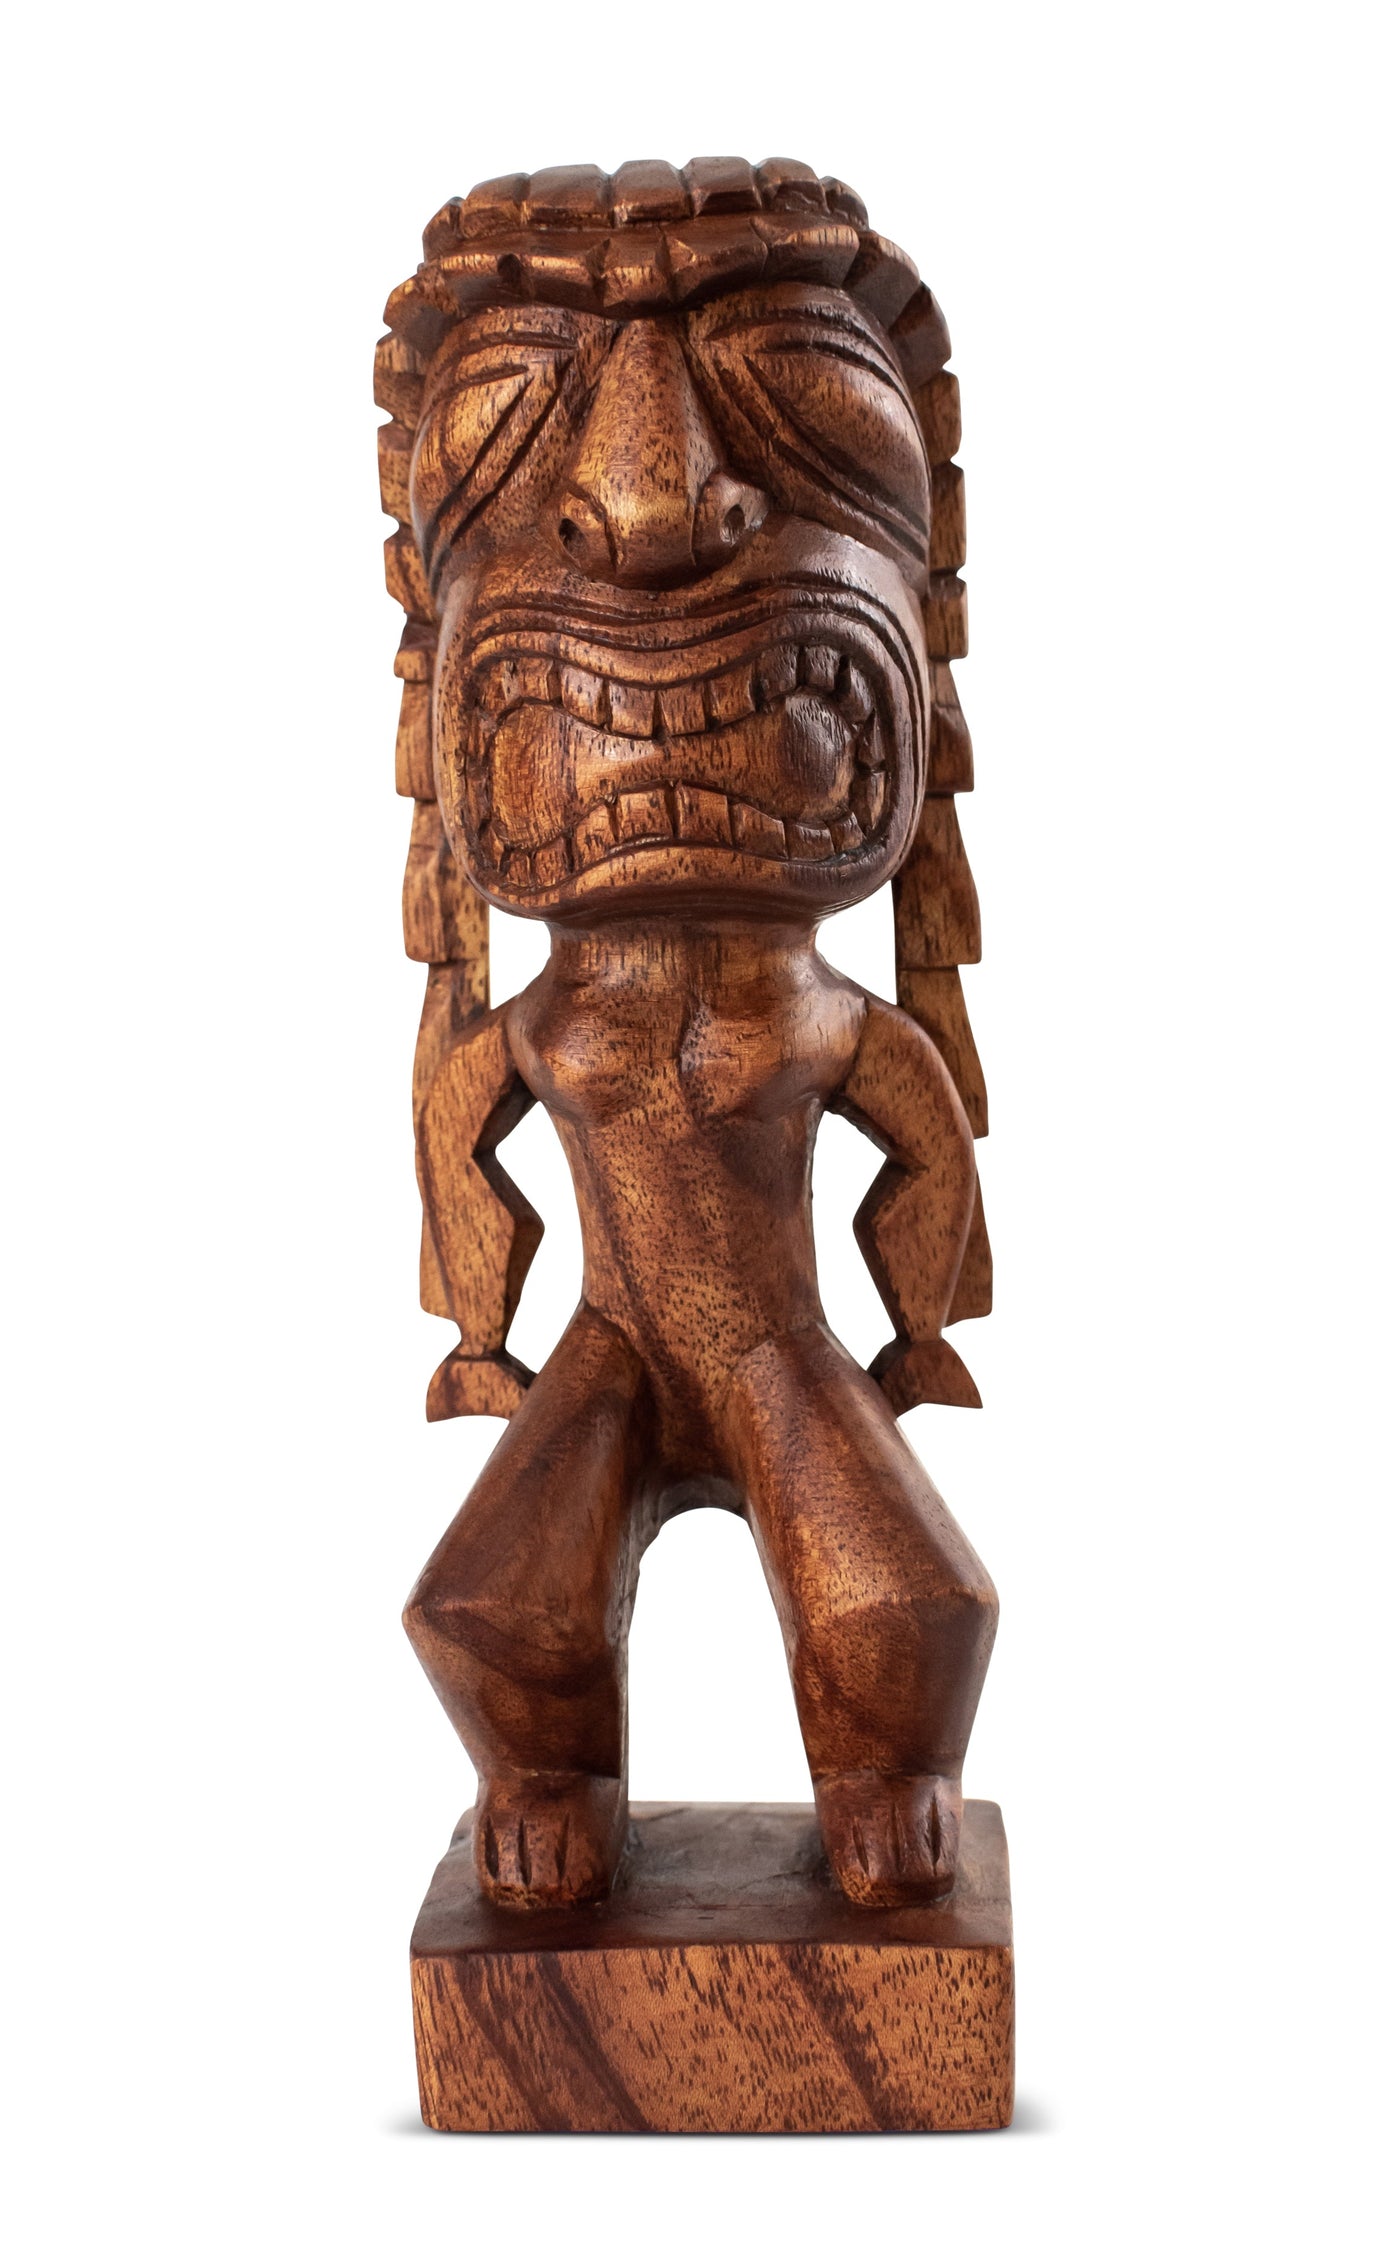 Handmade Wooden Primitive Angry Face Curly Hair Tribal Statue Sculpture Tiki Bar Handcrafted Unique Gift Art Home Decor Accent Figurine Artwork Hand Carved